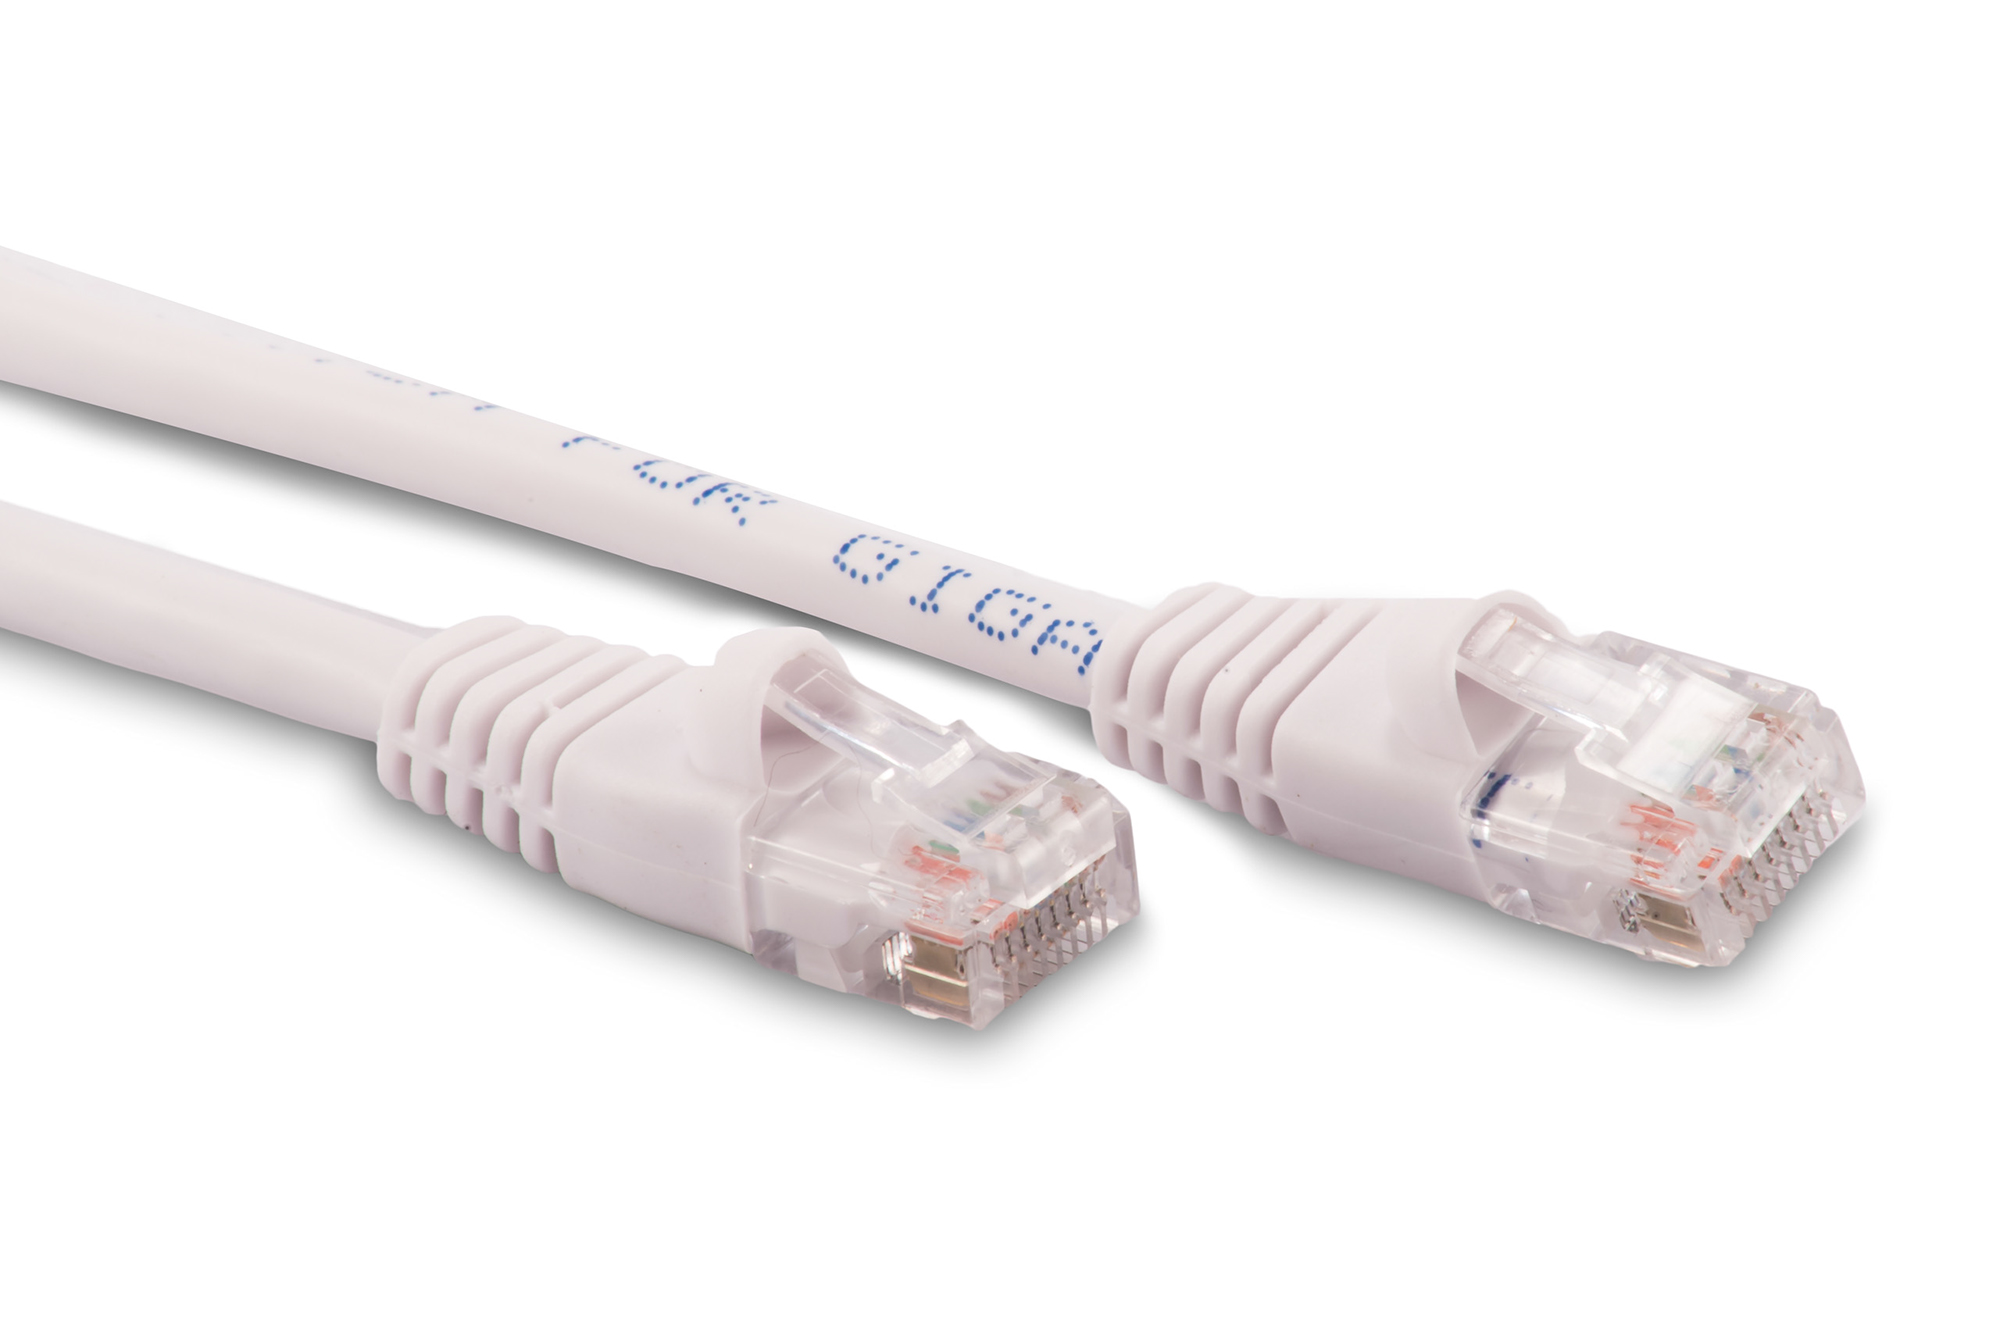 1ft Cat6 Ethernet Patch Cable - White Color - Snagless Boot